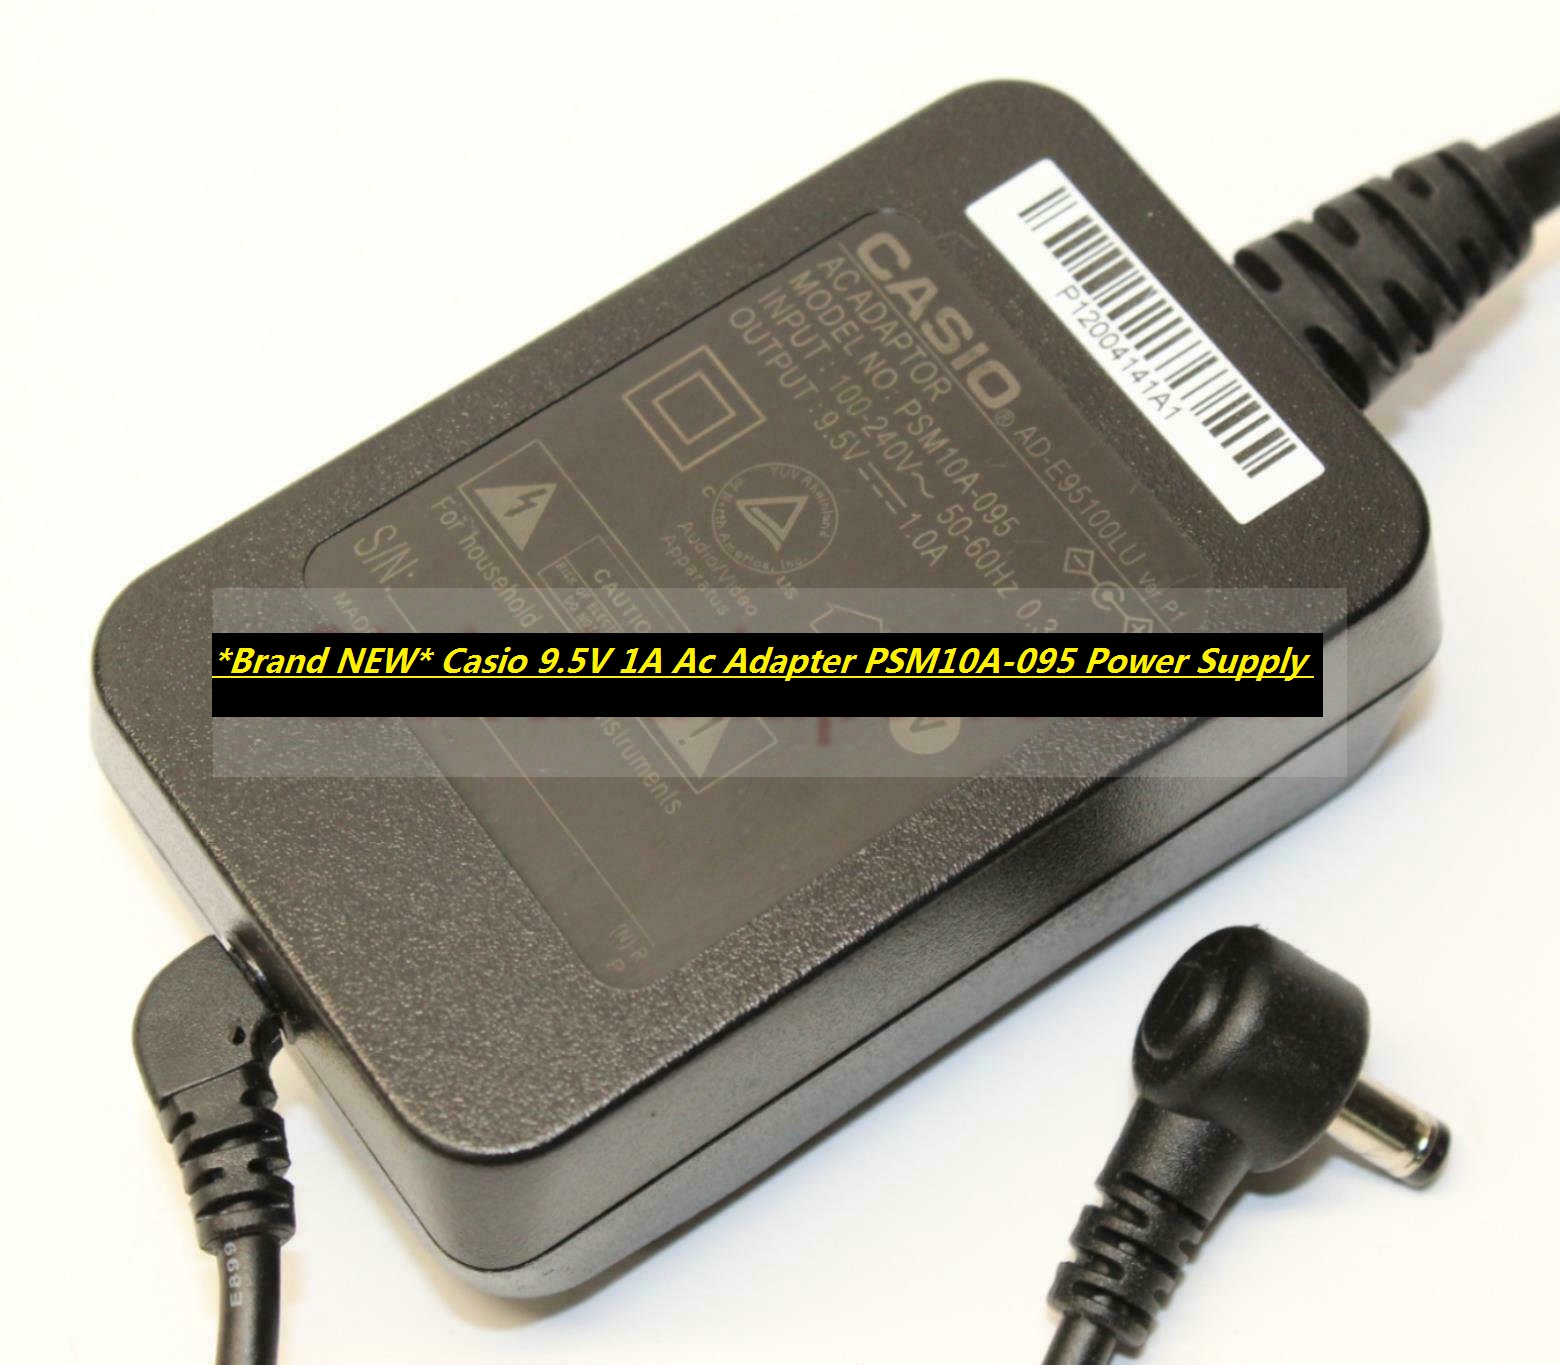 *Brand NEW* Casio 9.5V 1A Ac Adapter PSM10A-095 Power Supply